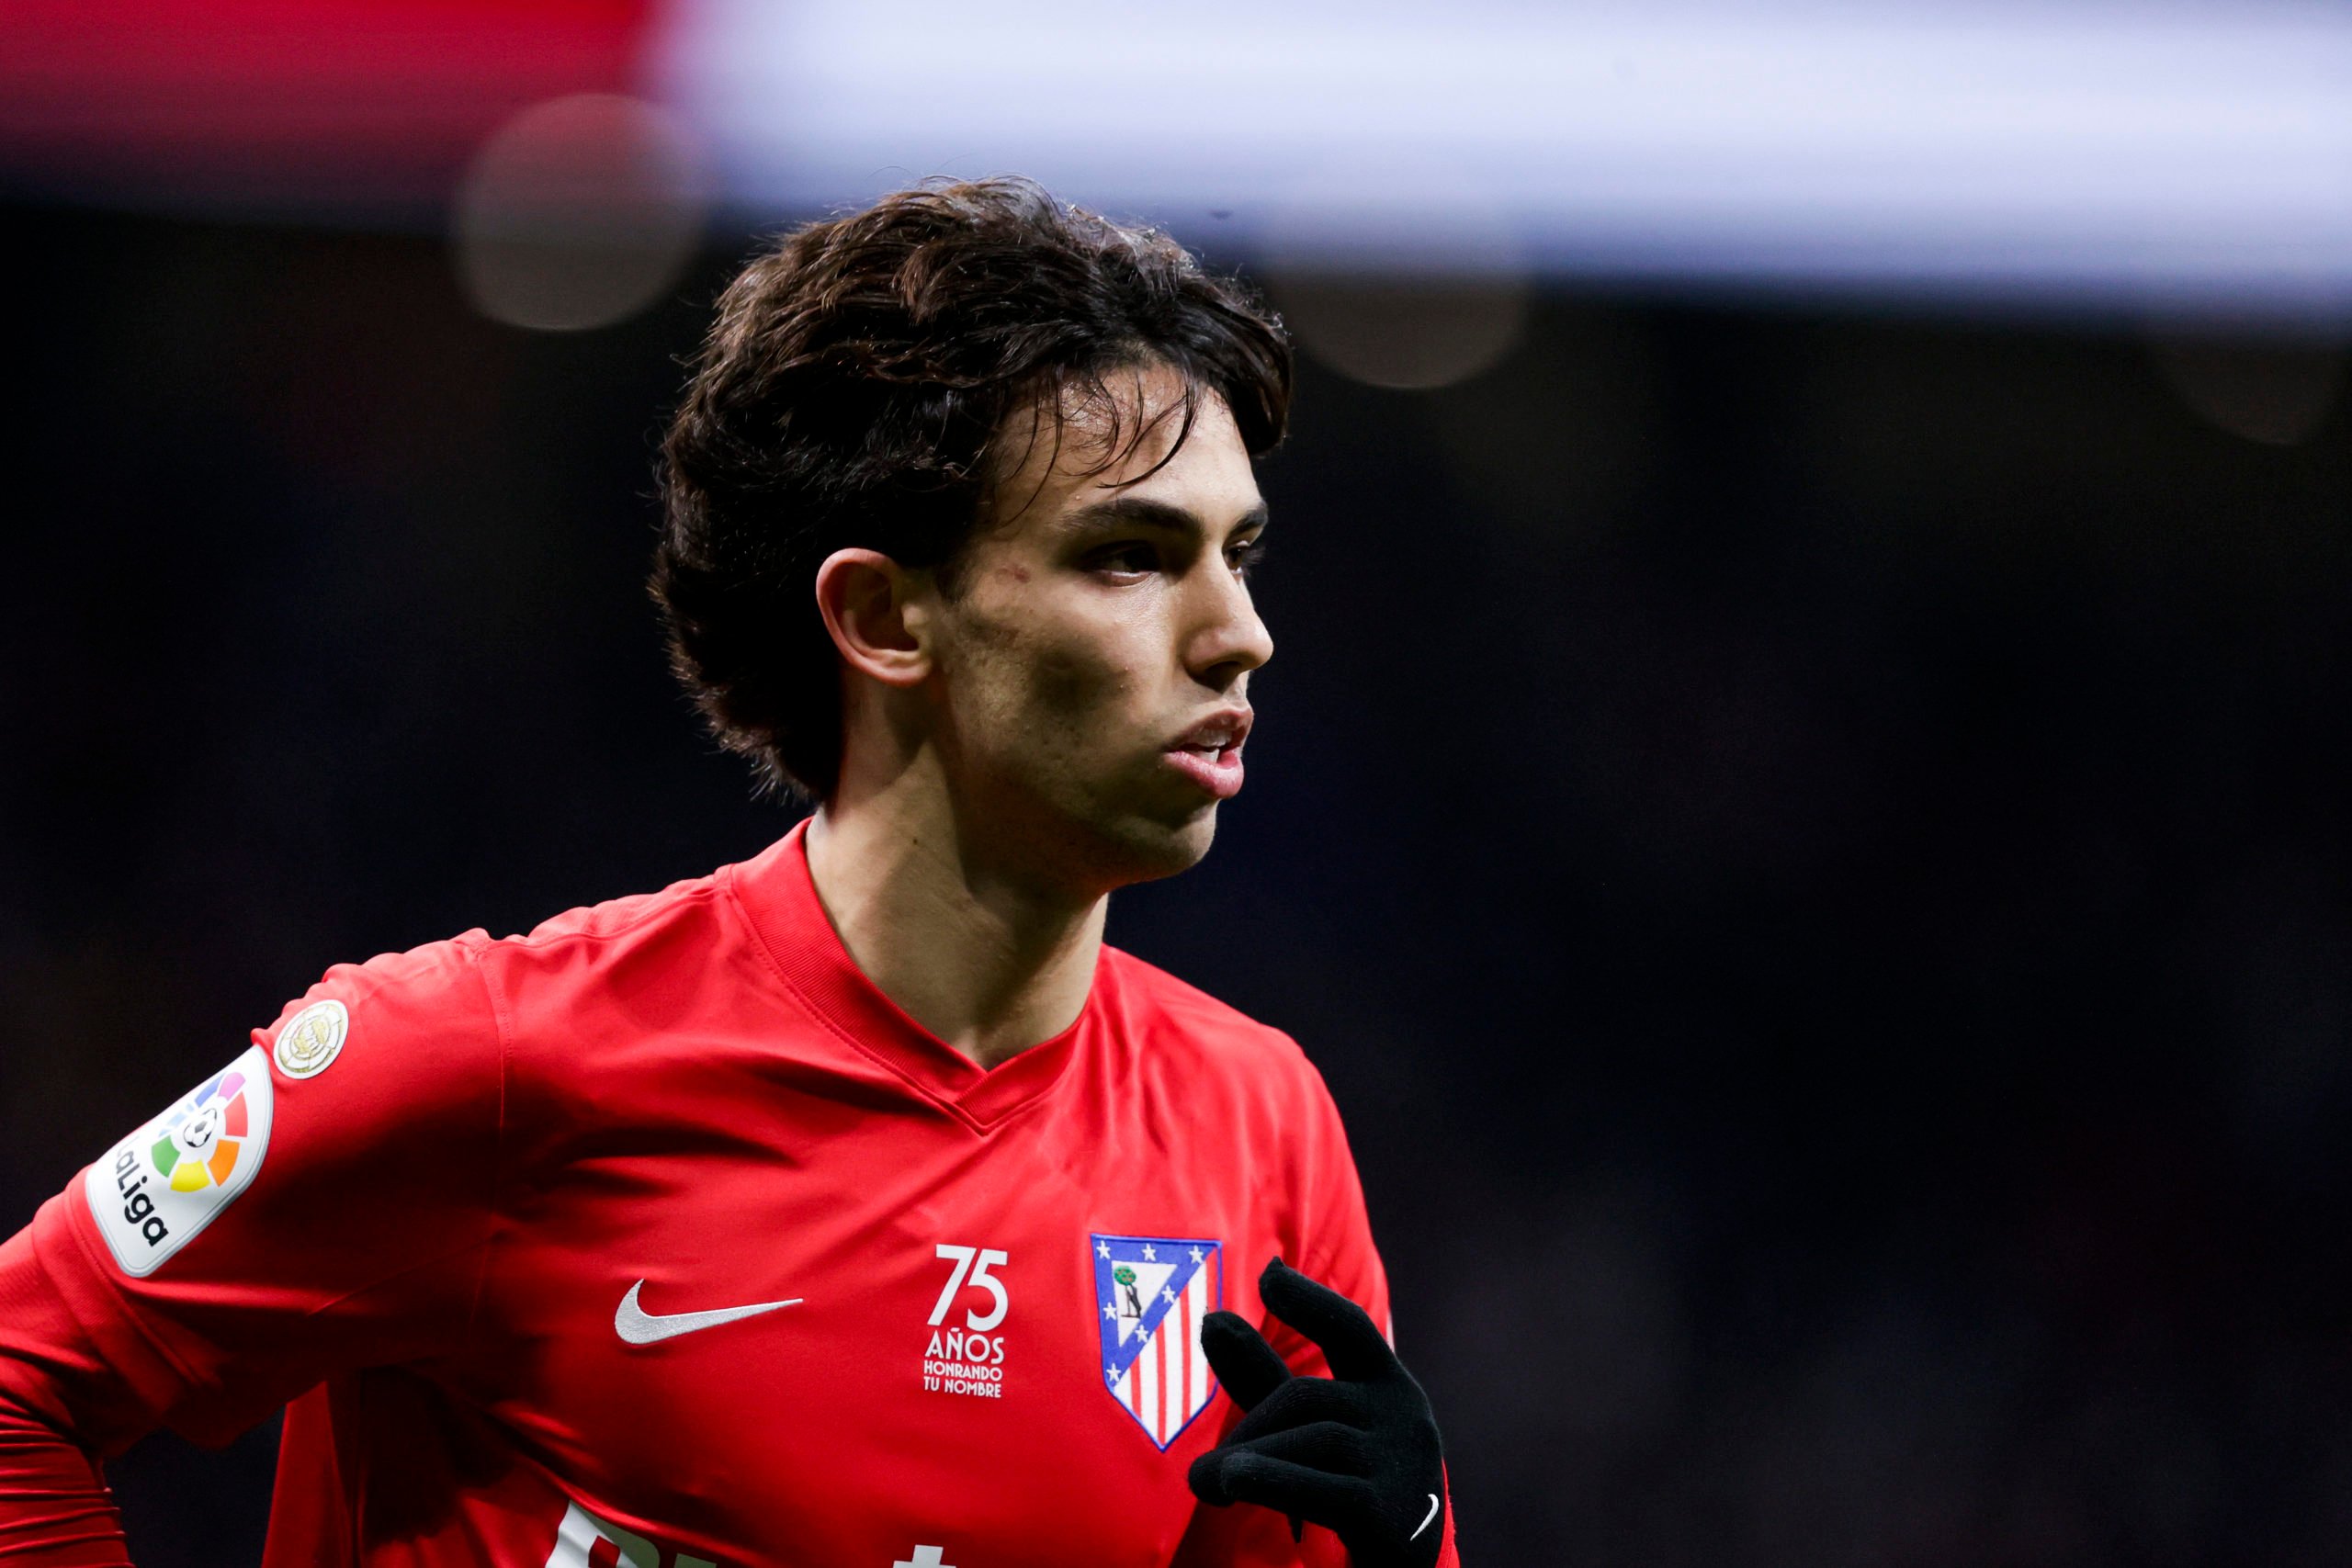 Joao Felix 'wants to leave' Atletico Madrid and Manchester United should move